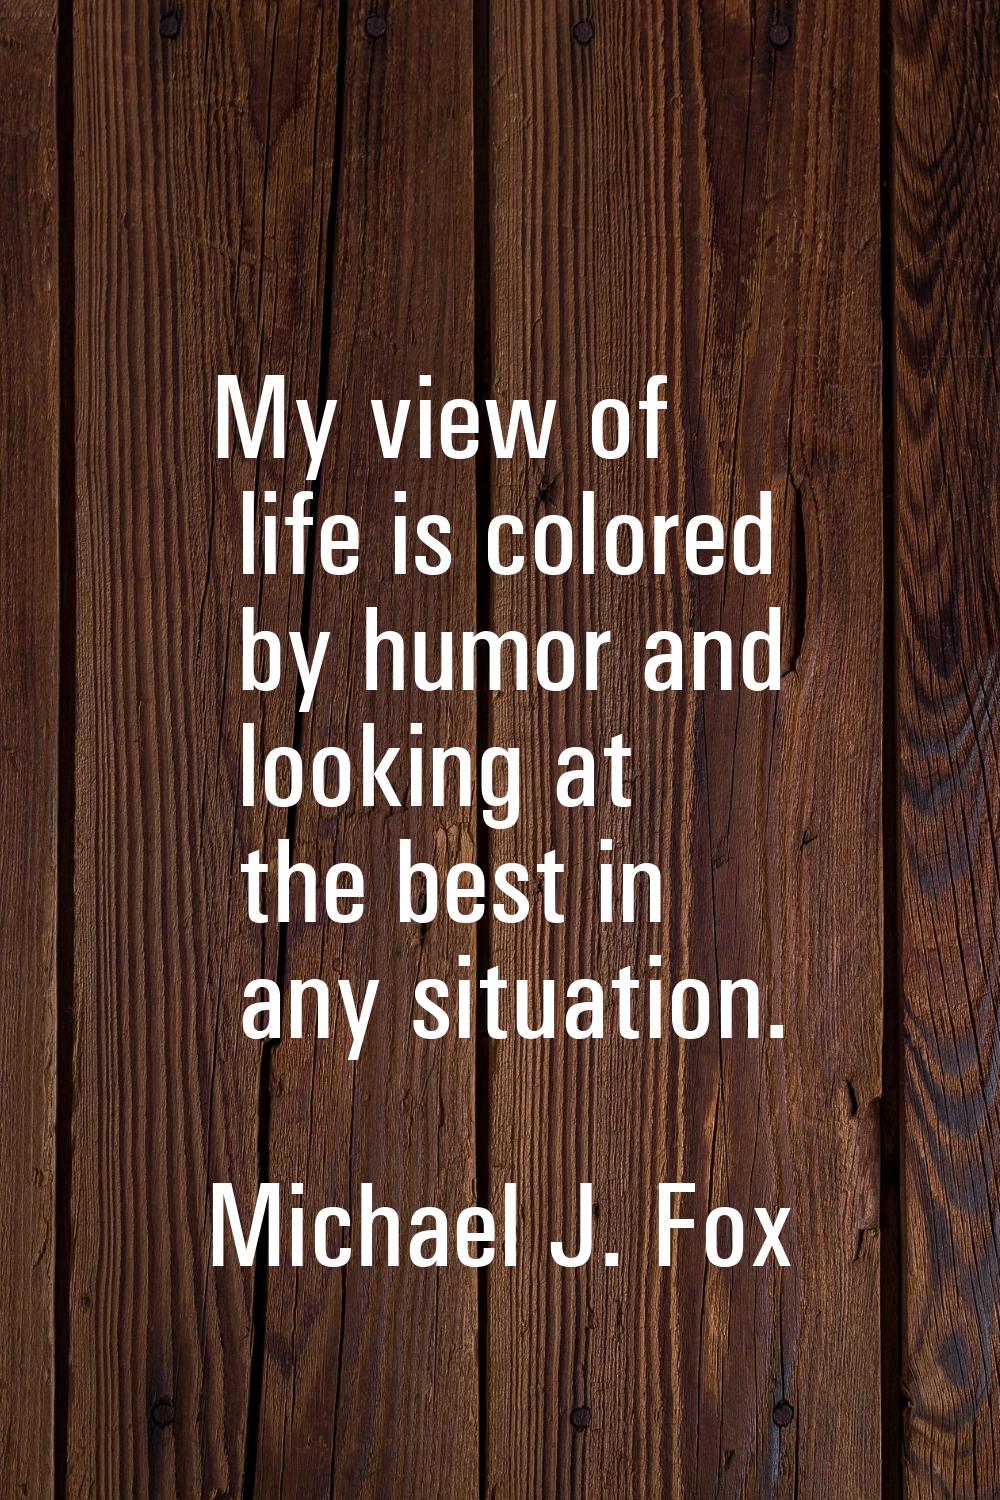 My view of life is colored by humor and looking at the best in any situation.